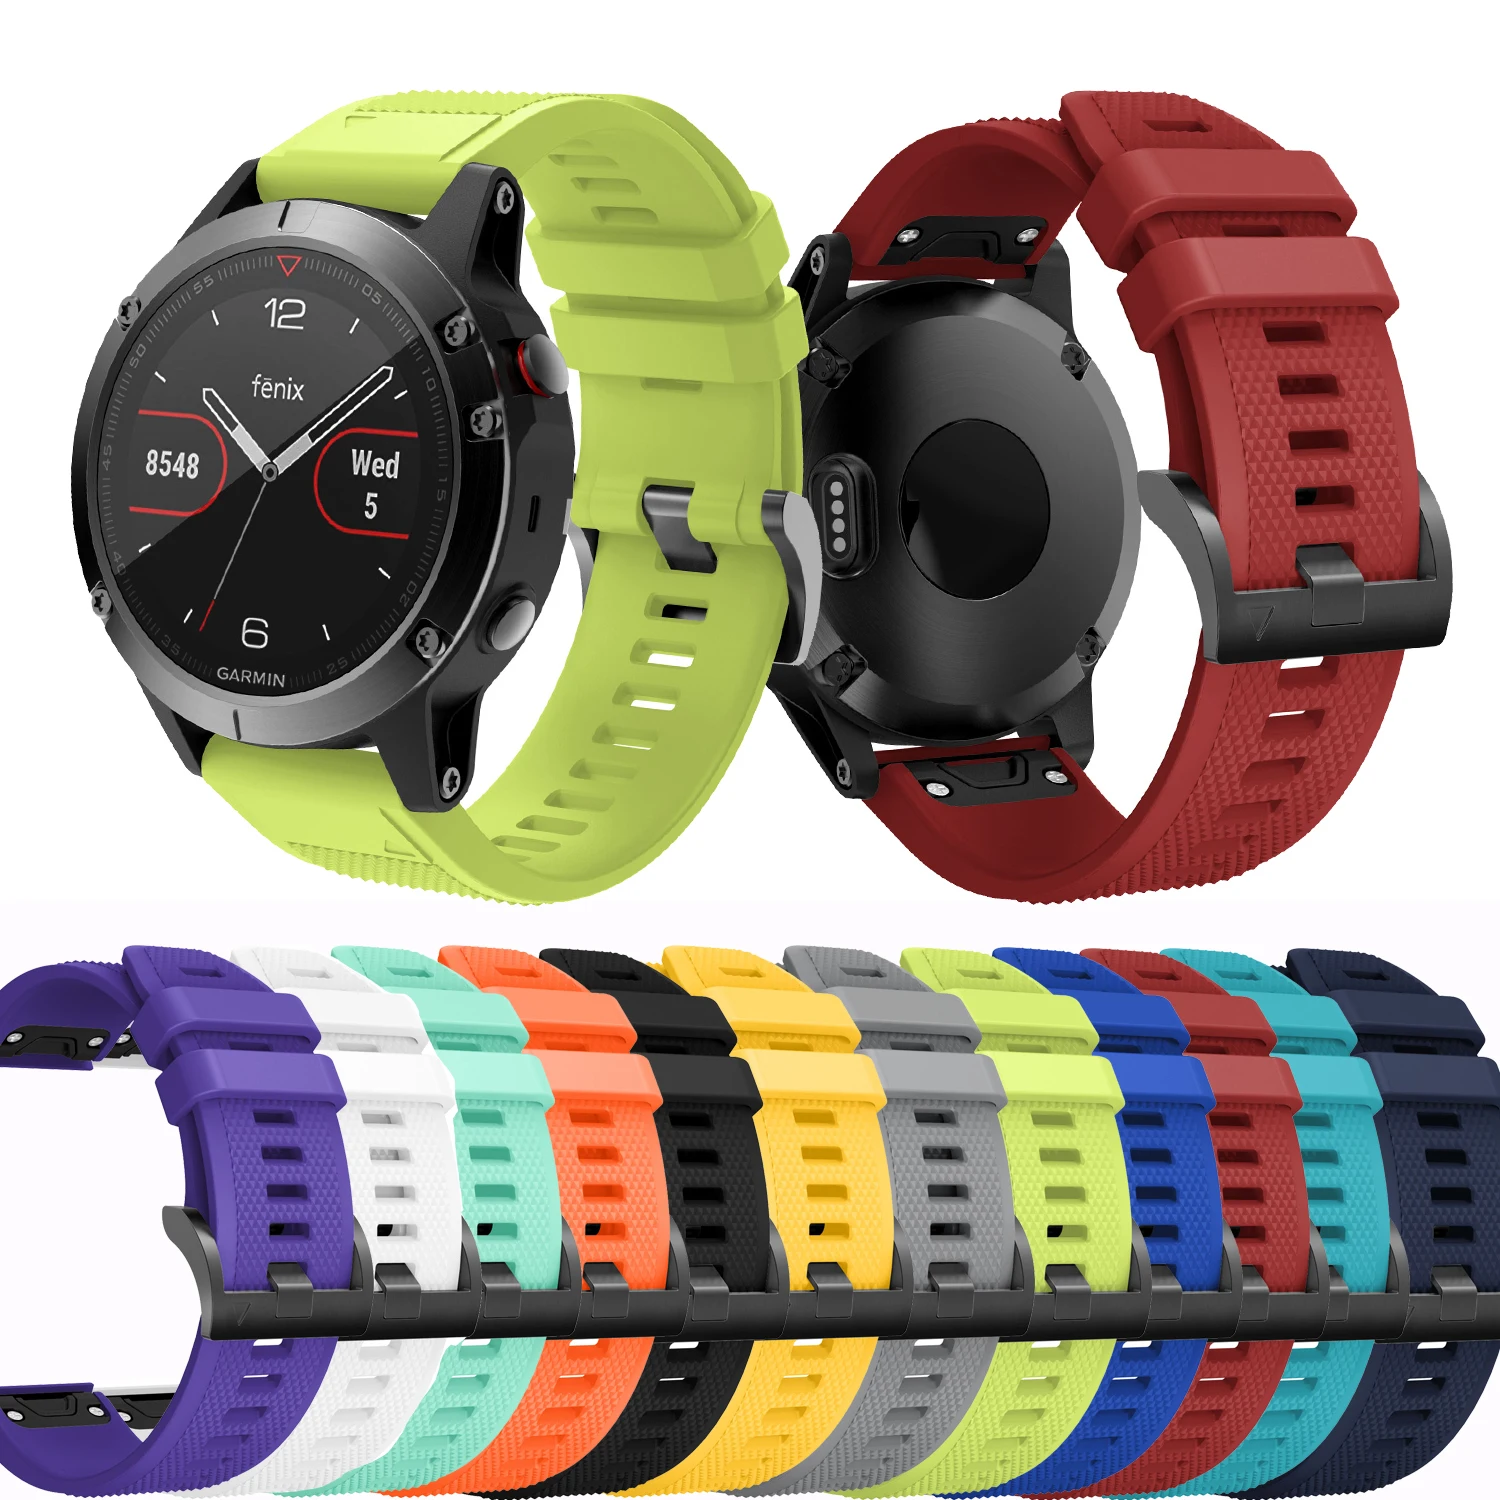 

Lianmi 20/22/26mm Strap For Garmin Fenix 6 Pro Watch Bands 22mm Quick Fit Silicone Replacement Band Straps Fit For Fenix 5 Plus, Multi colors/as the picture shows